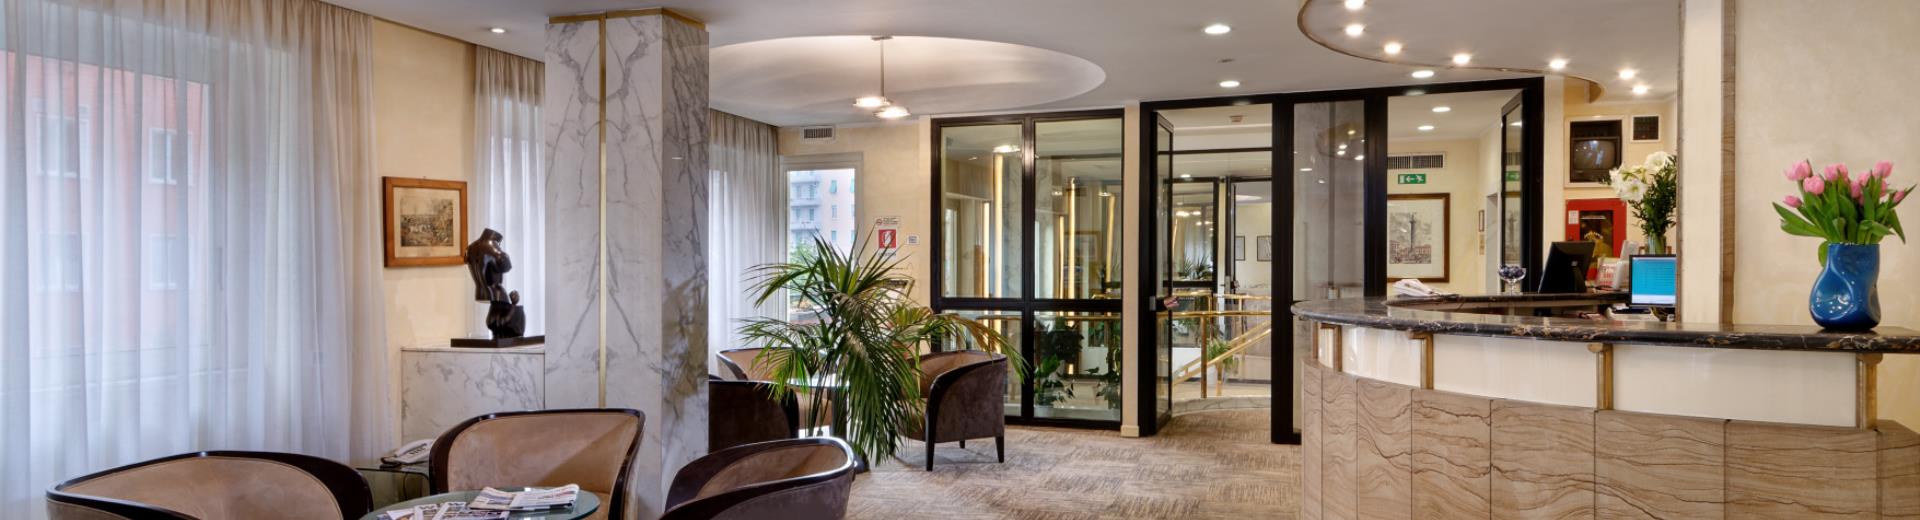 Best Western Piccadilly Roma